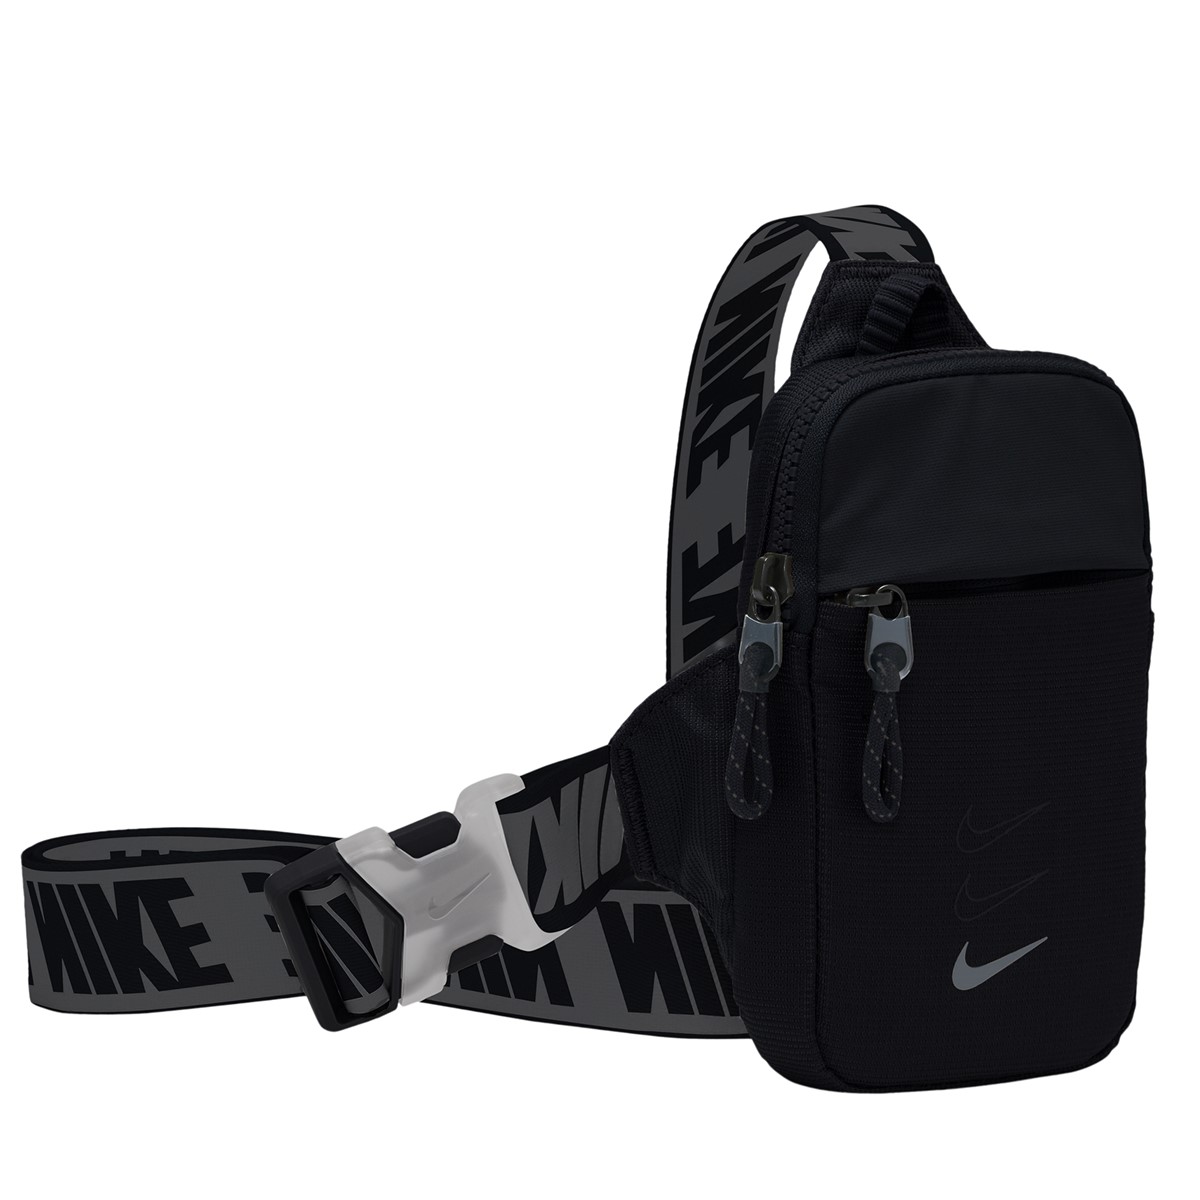 nike leather boot,Save up to 15%,www.masserv.com